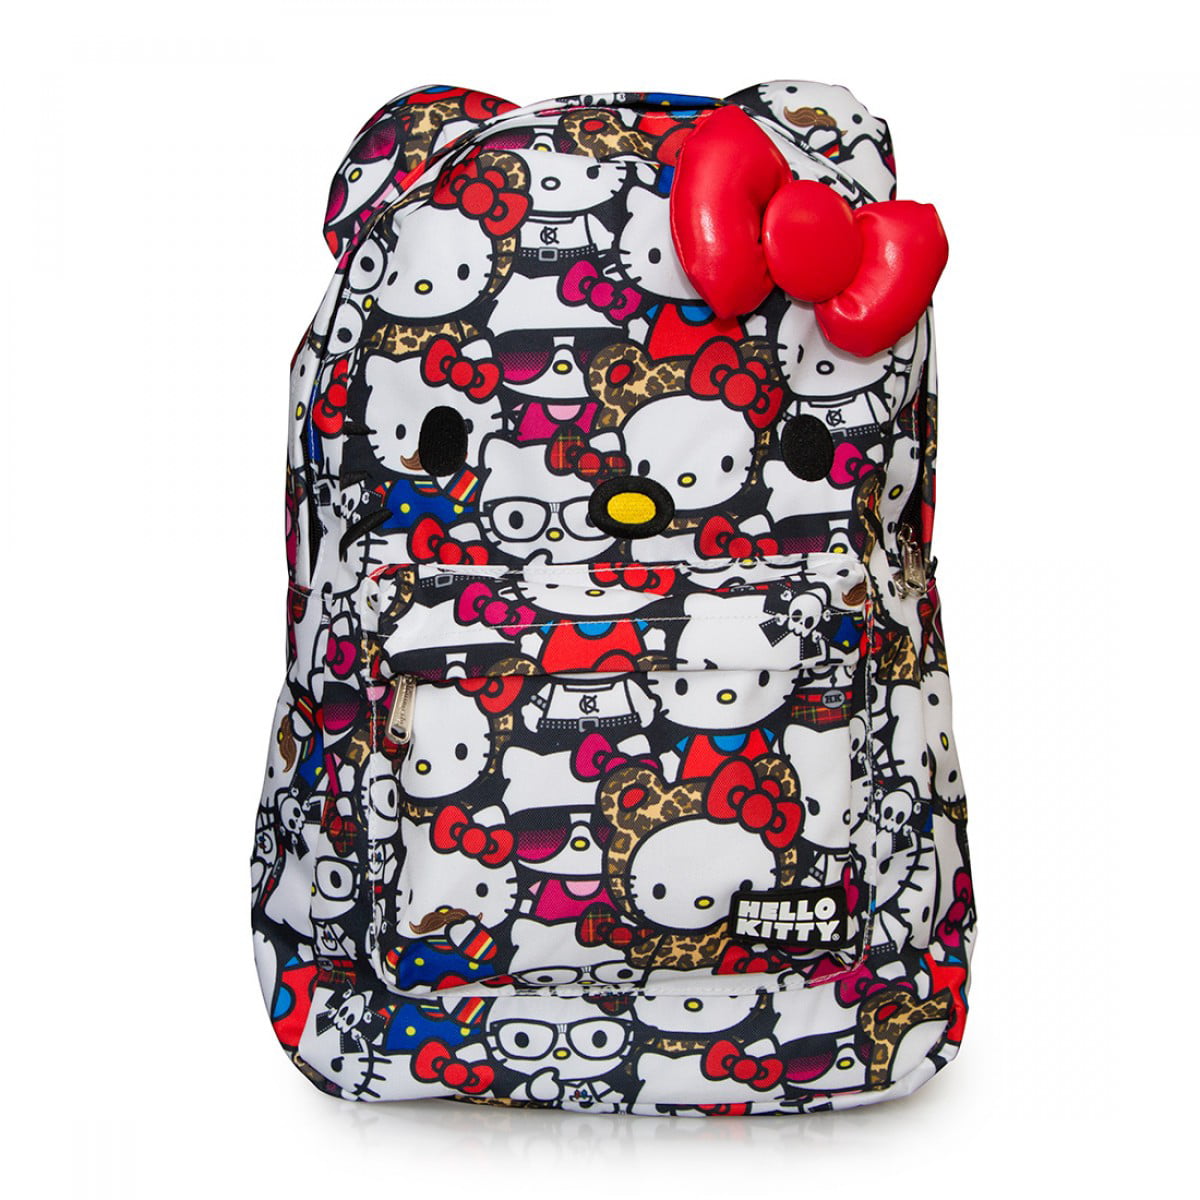 Backpack - Hello Kitty - All Stars Print Face With Bow New Gifts 